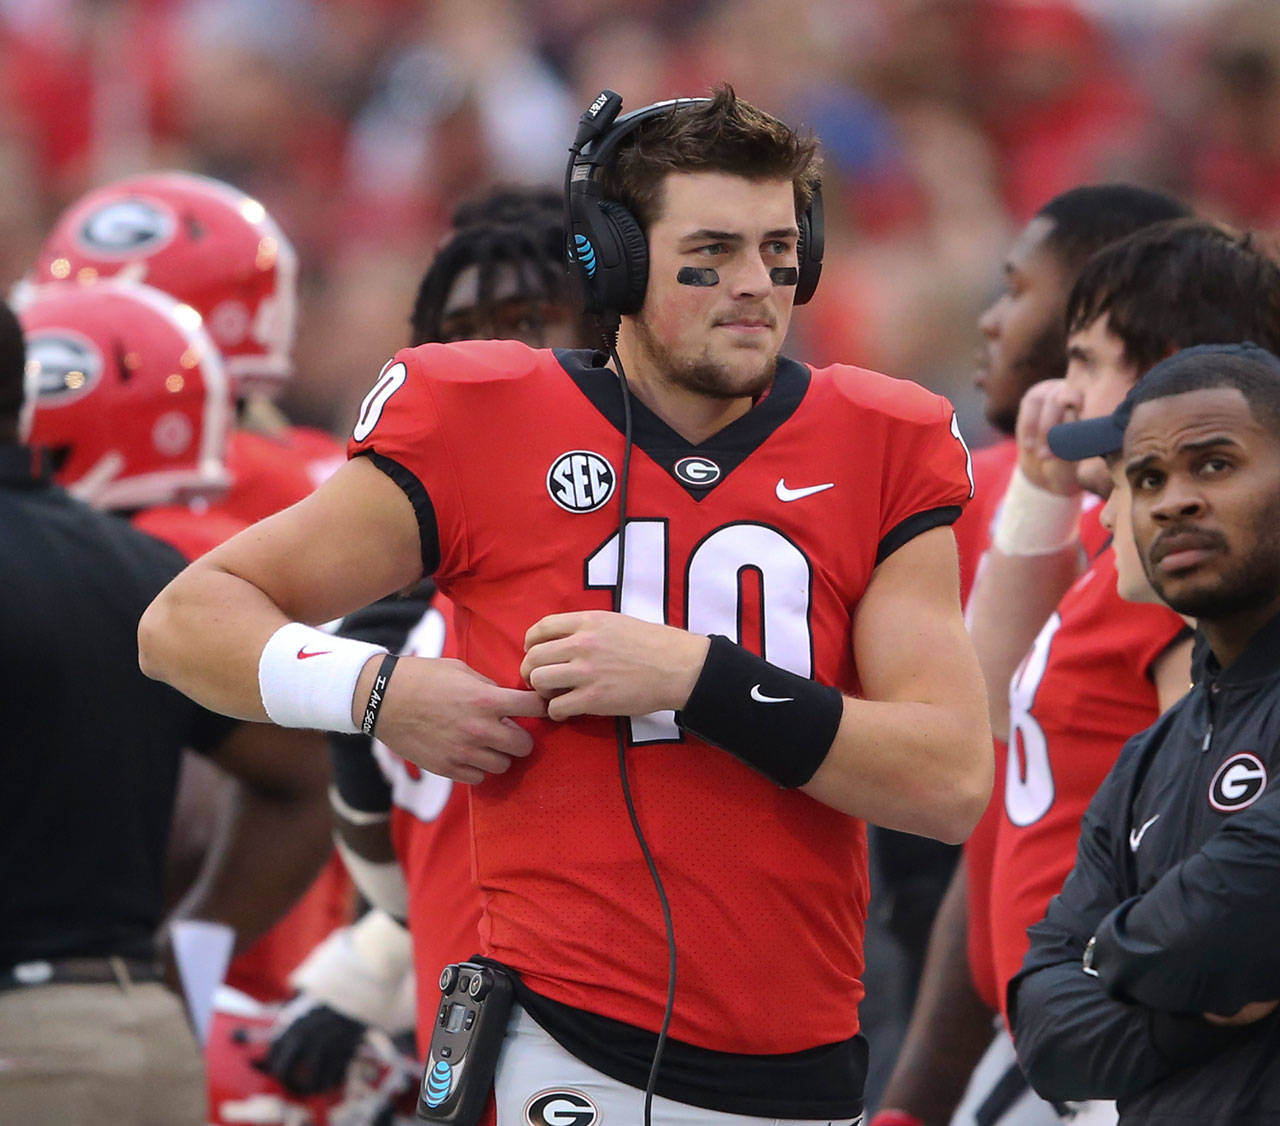 Georgia quarterback Jacob Eason (10), a Lake Stevens alum, stands on the sideline in the first half of a game against Kentucky on Nov. 18, 2017, in Athens, Ga. (AP Photo/John Bazemore)